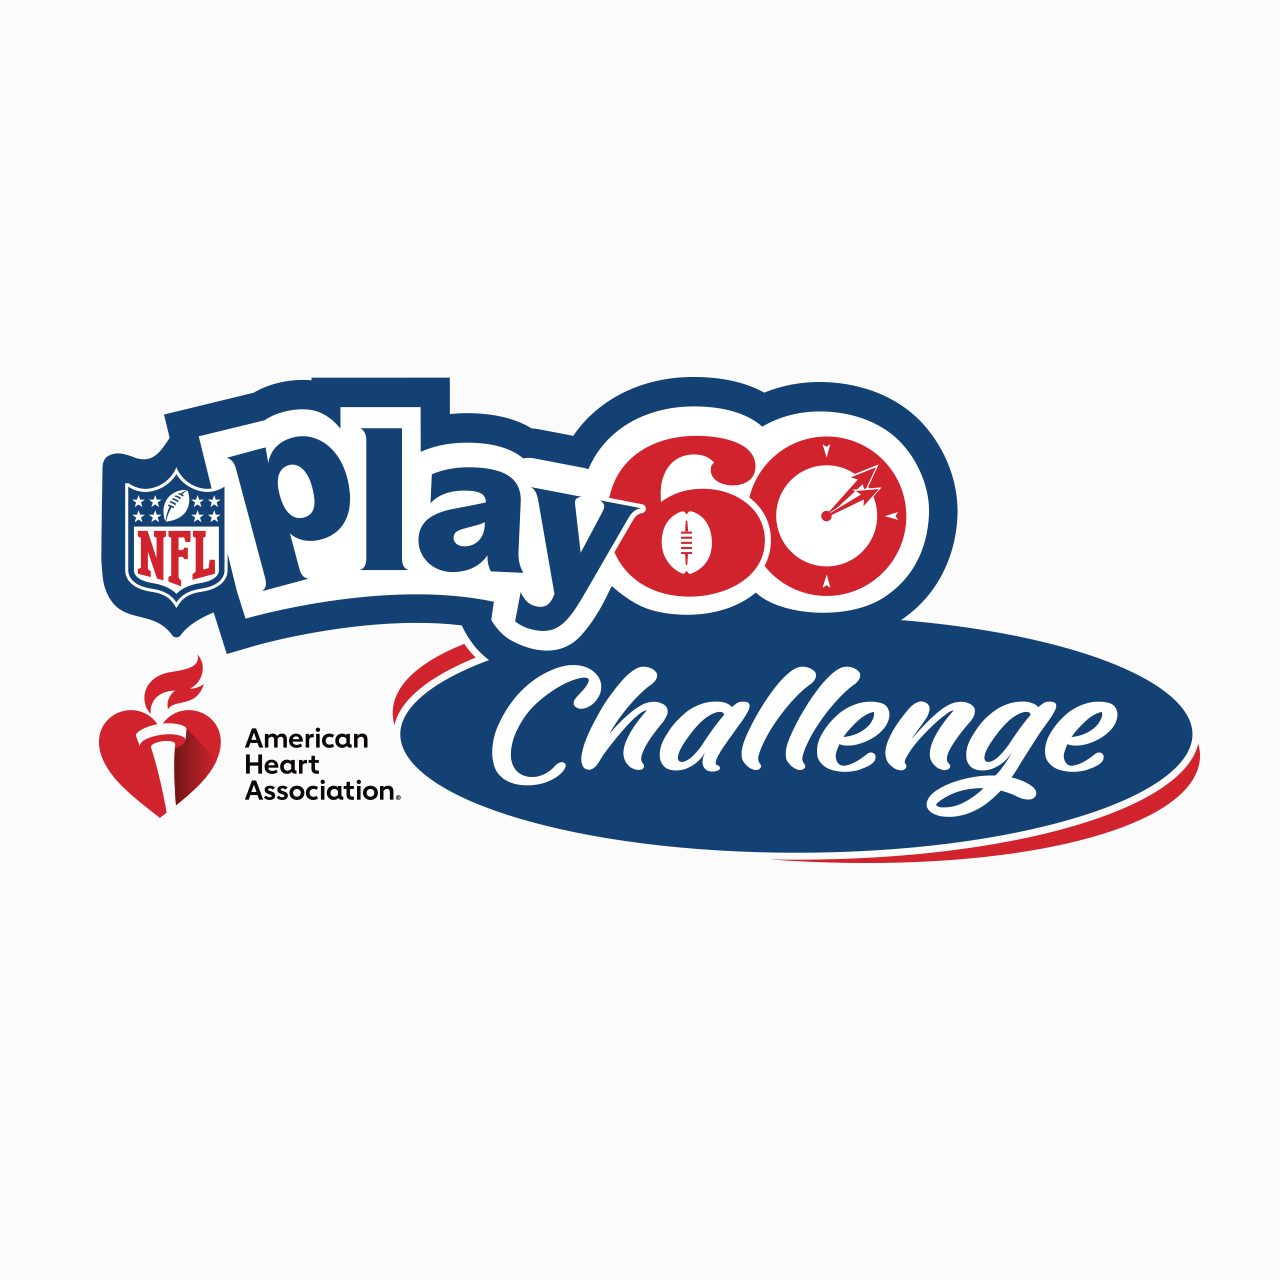 Logo design and type treatment for American Heart Association's Play 60 Challenge Program